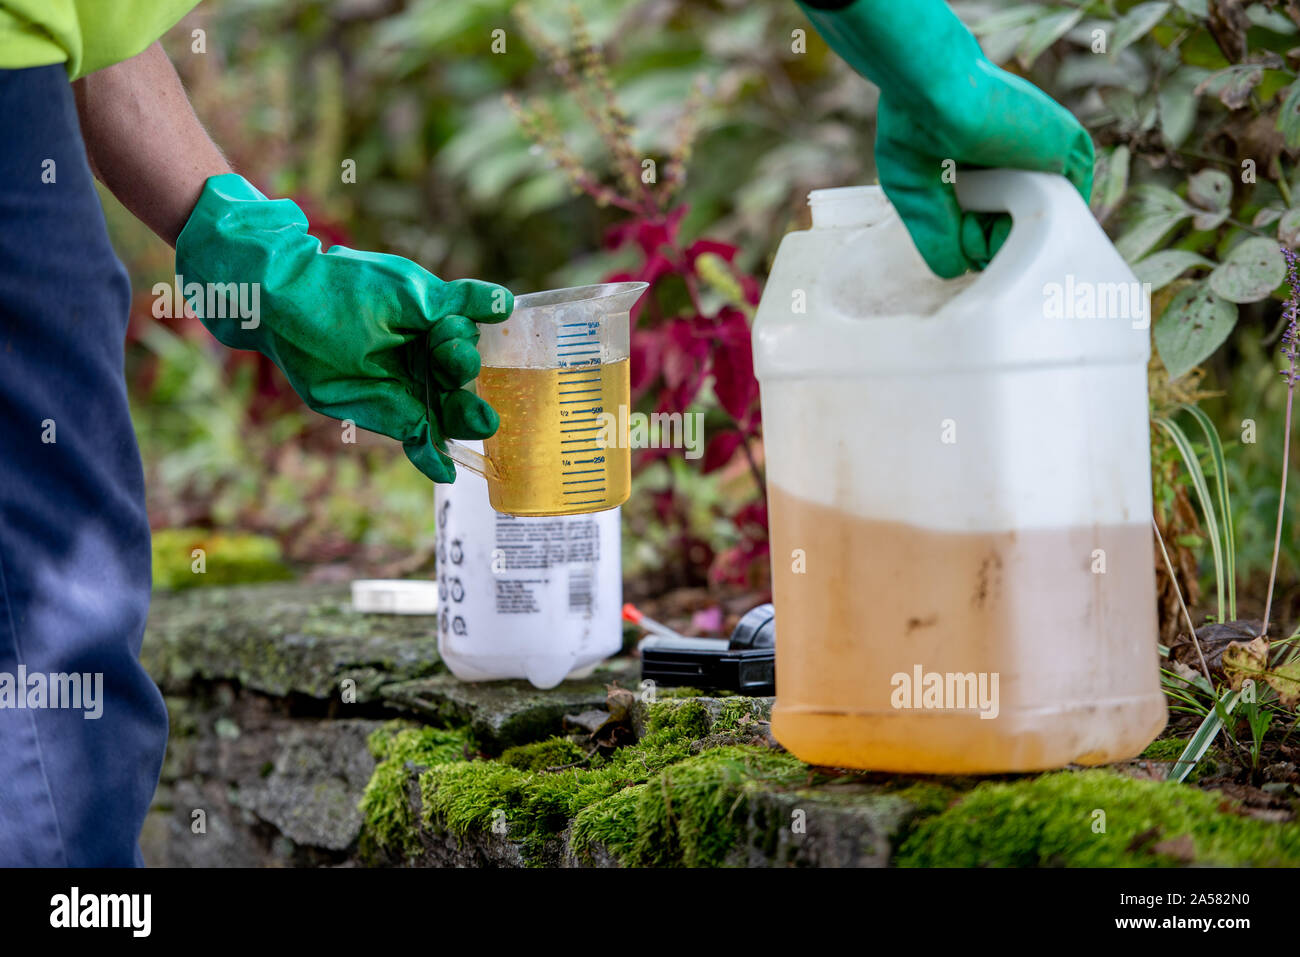 ARBORIST MIXING TRYCLOPYR HERBICIDE TO TREAT AILANTHUS ALTISSIMA  TREES FOR COMPLETE REMOVAL, PENNSYLVANIA Stock Photo